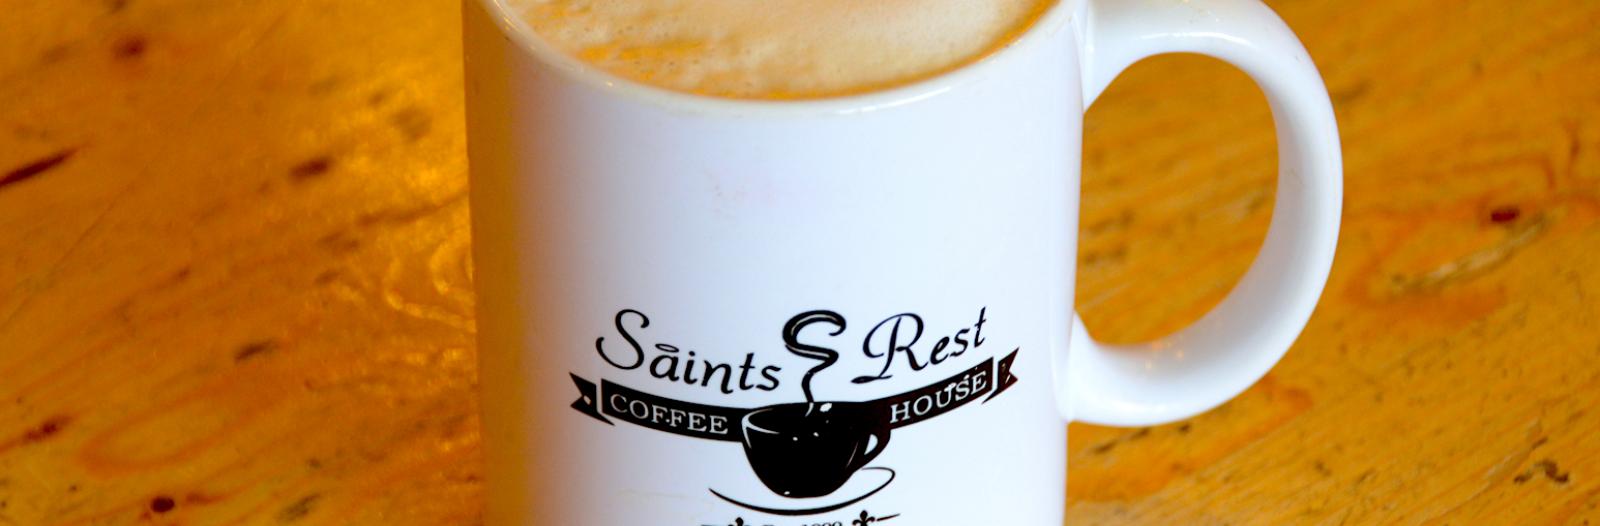 Coffee cup with Saints Rest logo